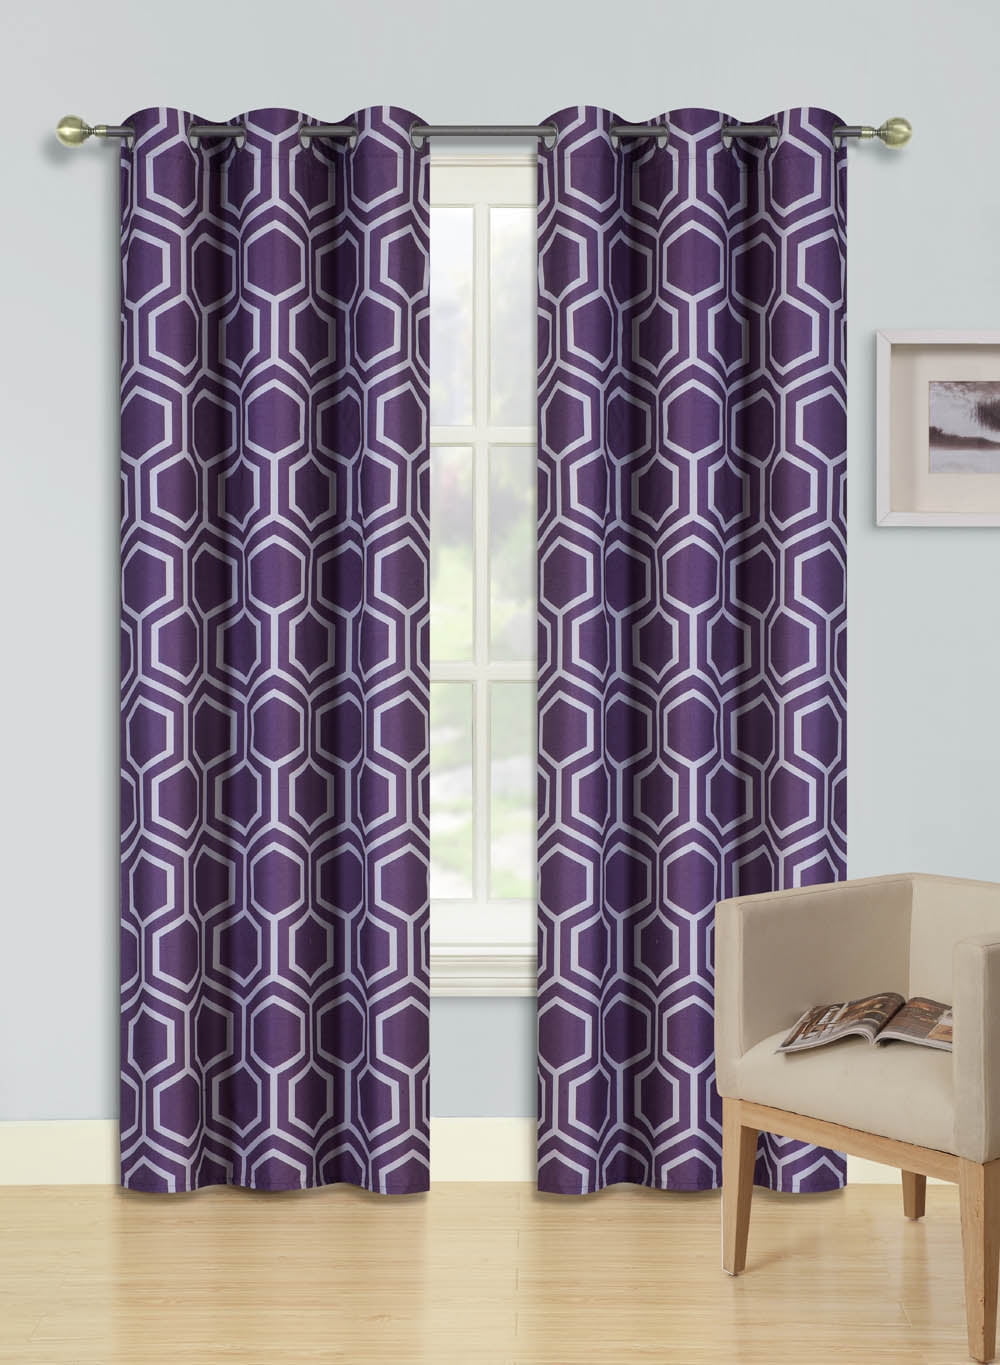 1 Set Rod Pocket Insulated Thermal Lined Blackout Window Curtain R64 Purple